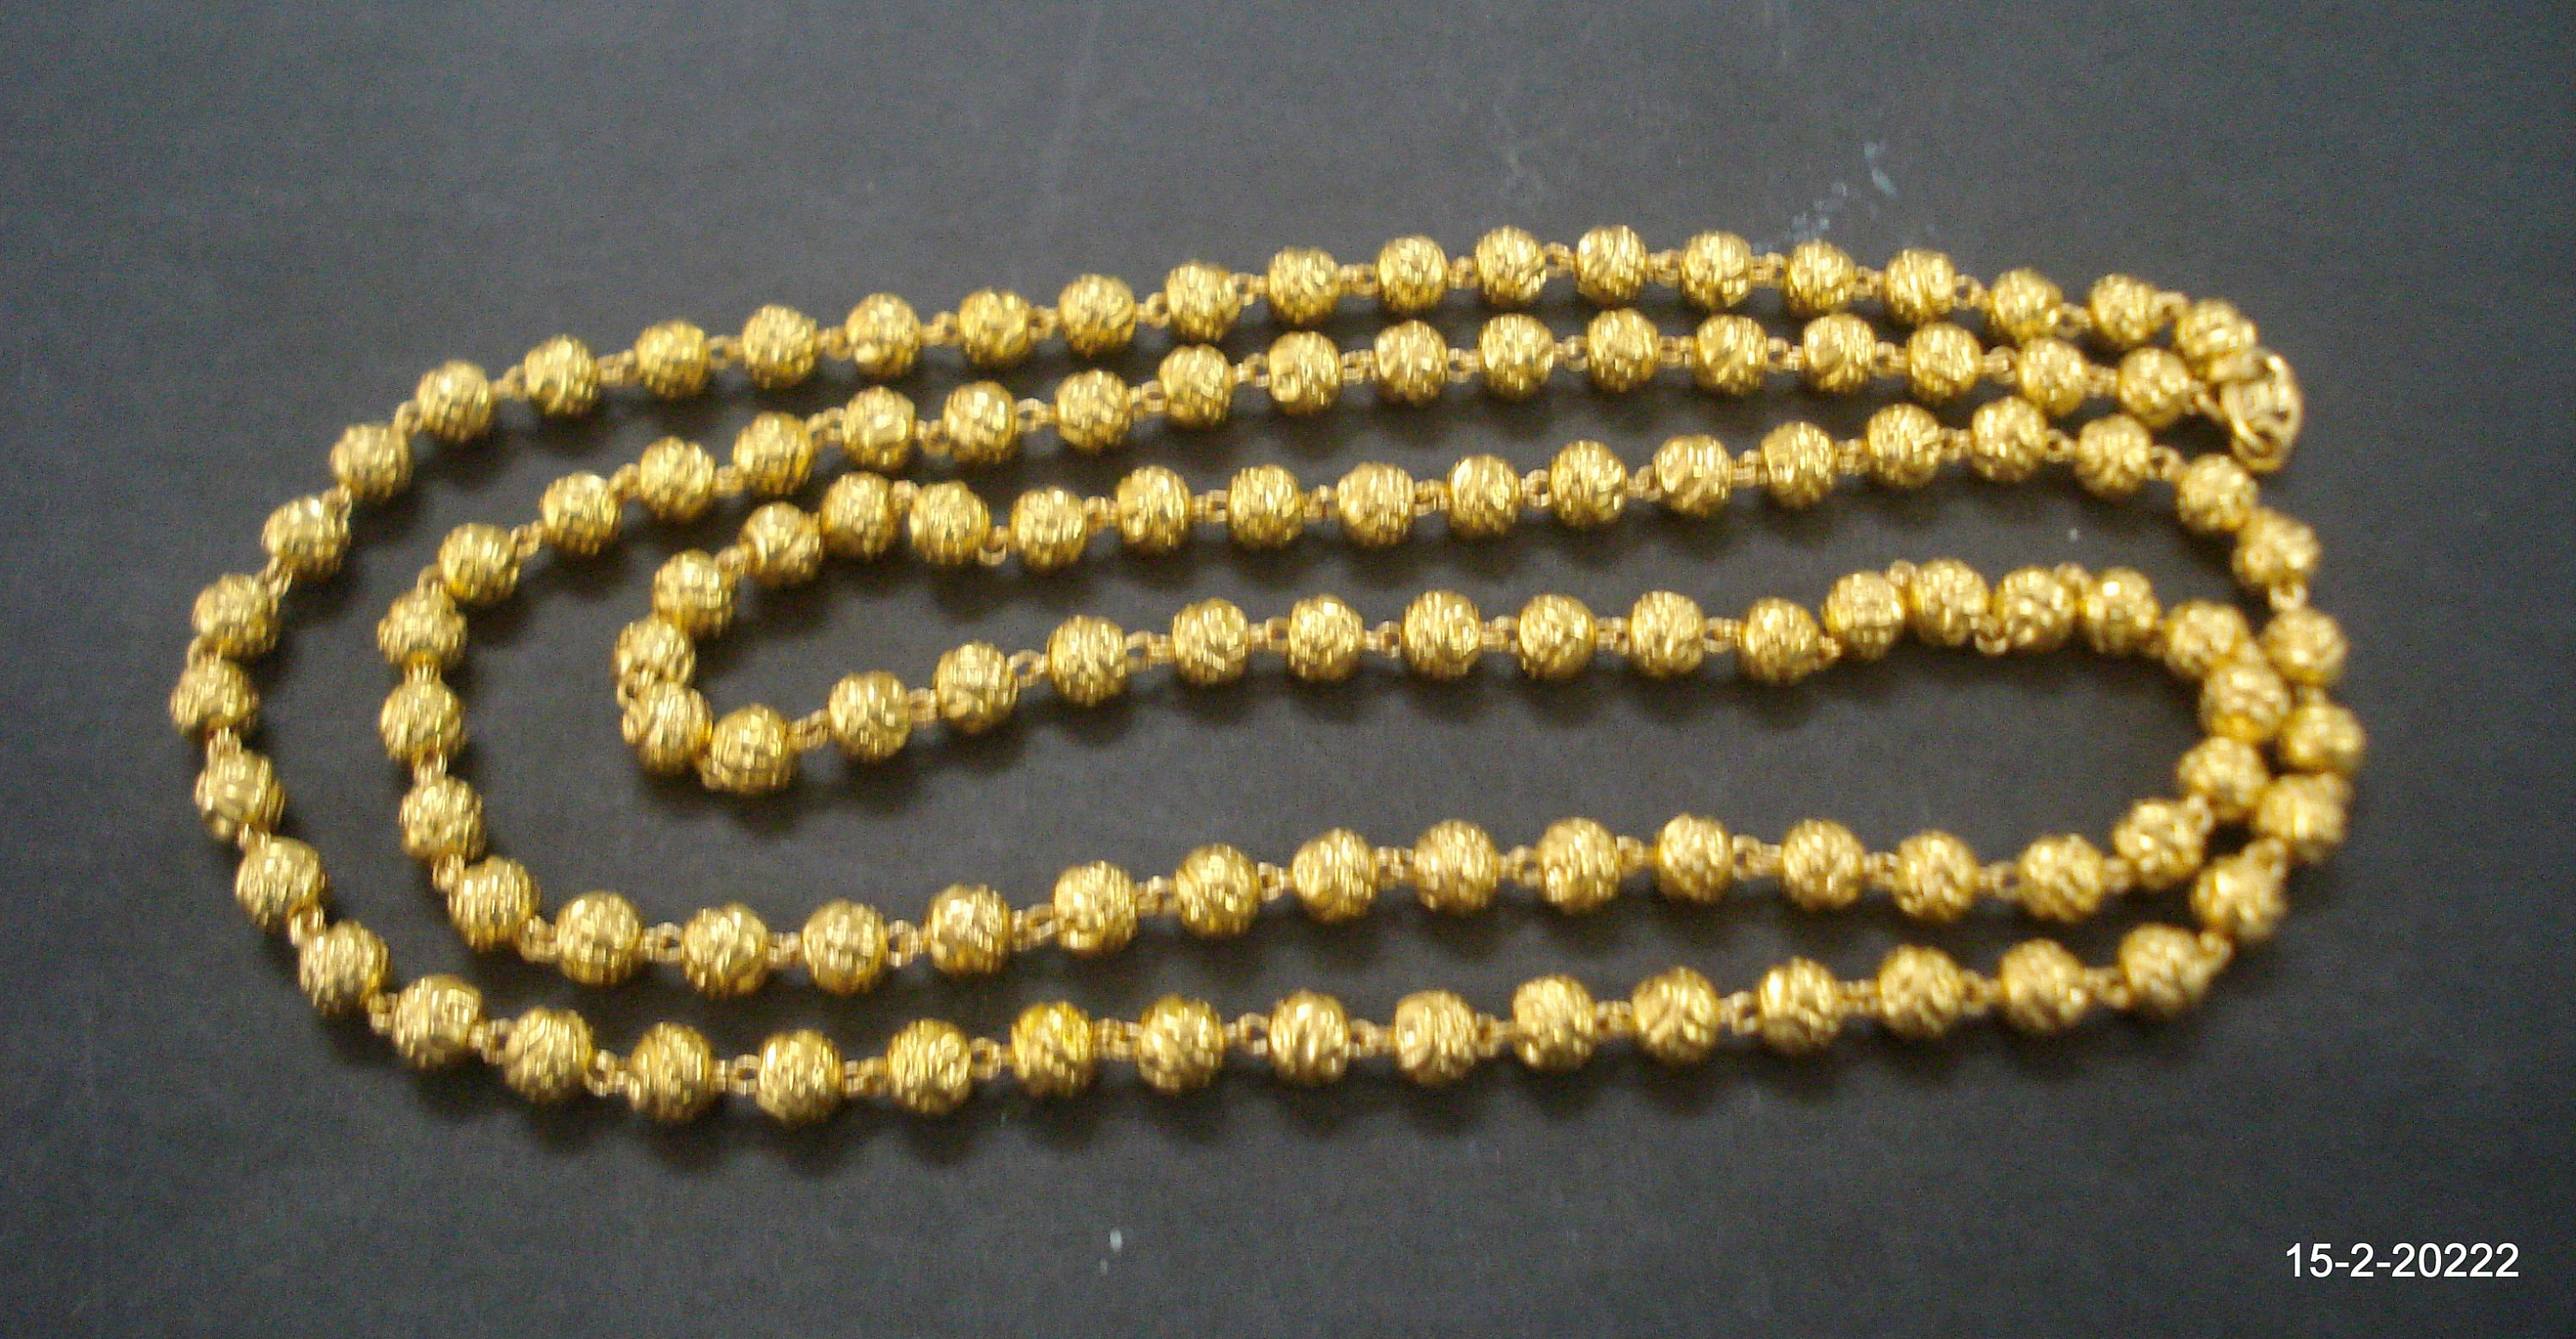 Ethnic Indian Women Fashion Jewelry Golden Beaded Chain Necklace Mala 22" cn11 